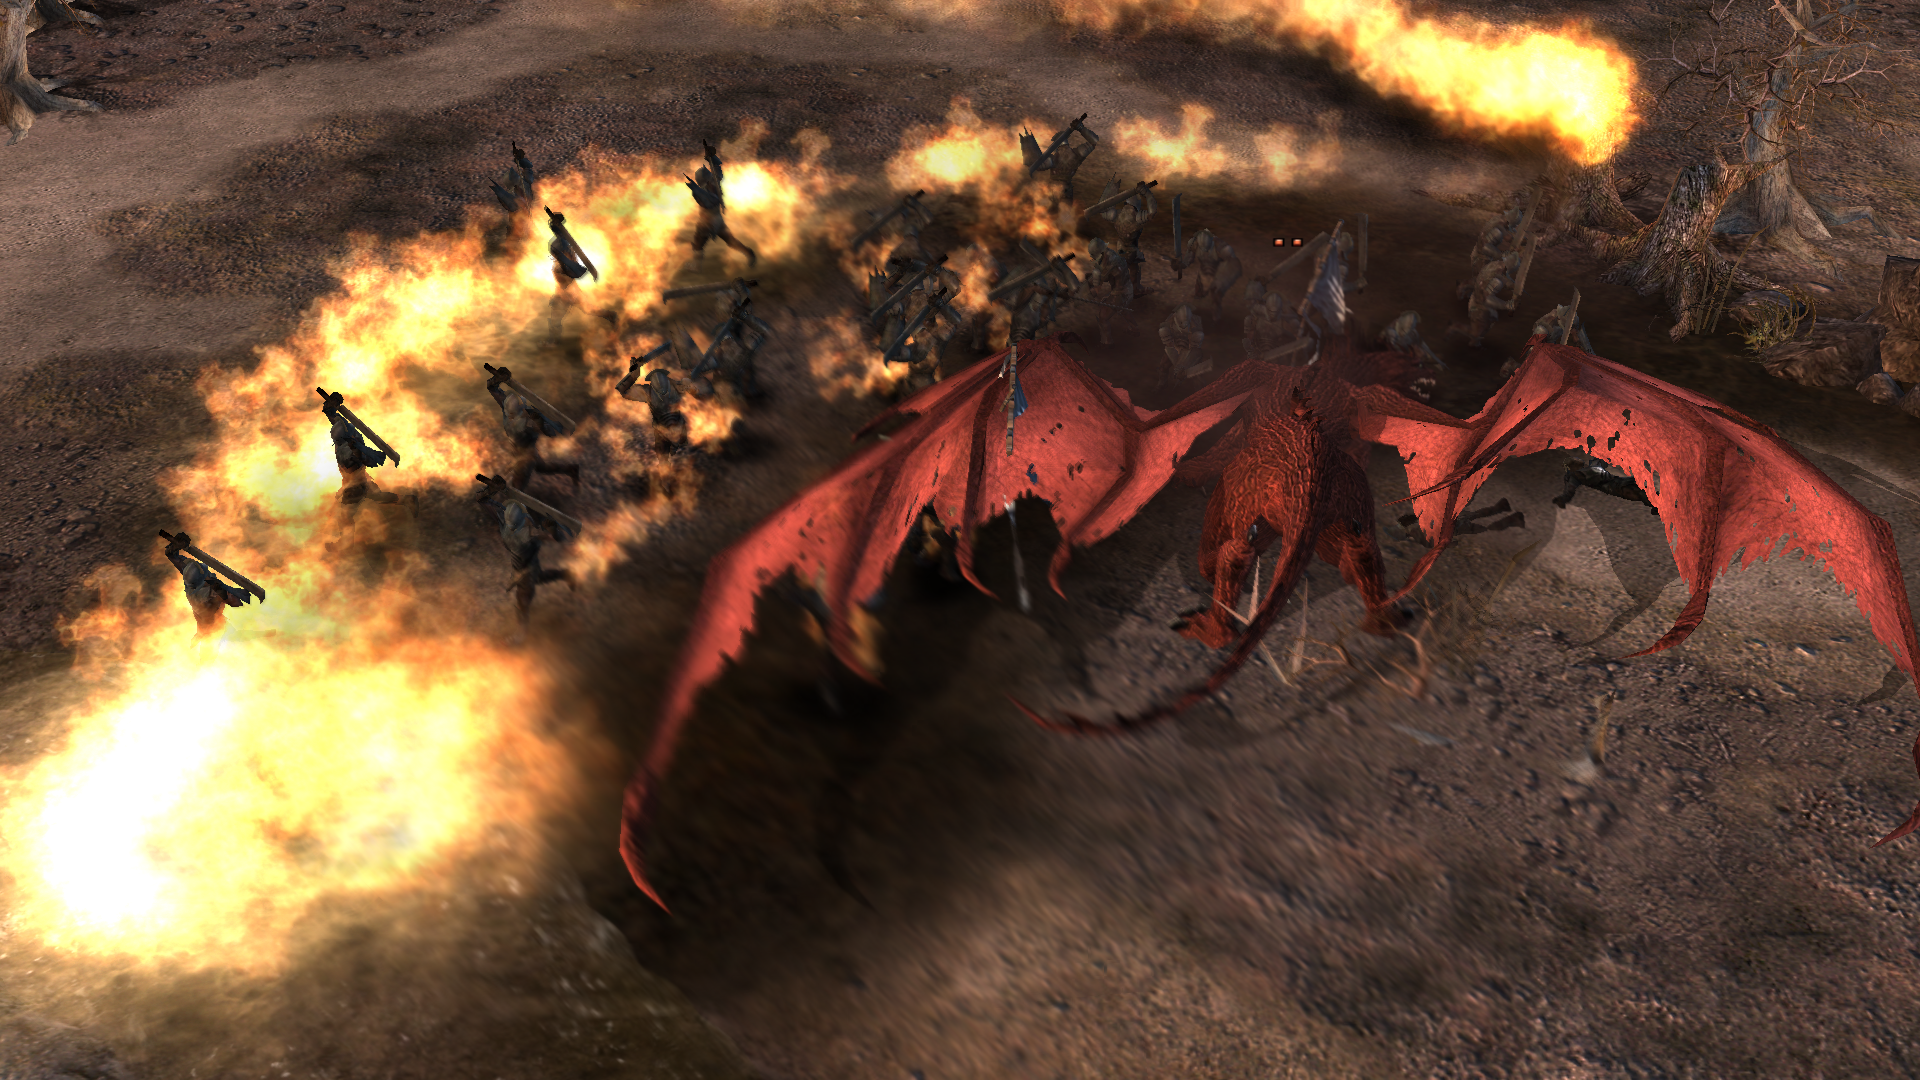 Glaurung image - The Four Ages mod for Battle for Middle-earth II - Mod DB